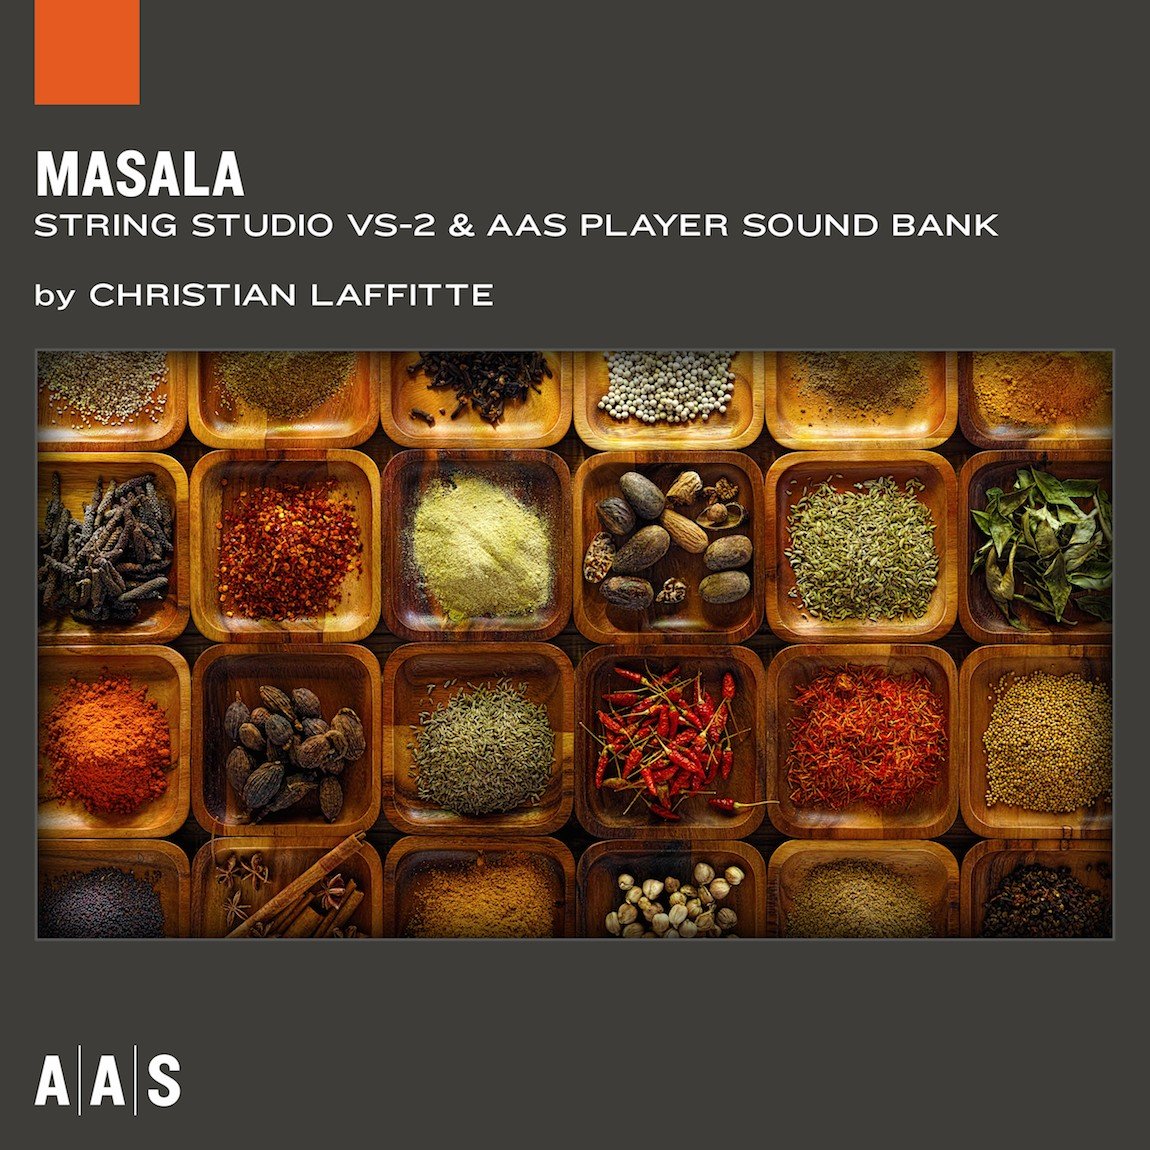 Applied Acoustics Systems Masala